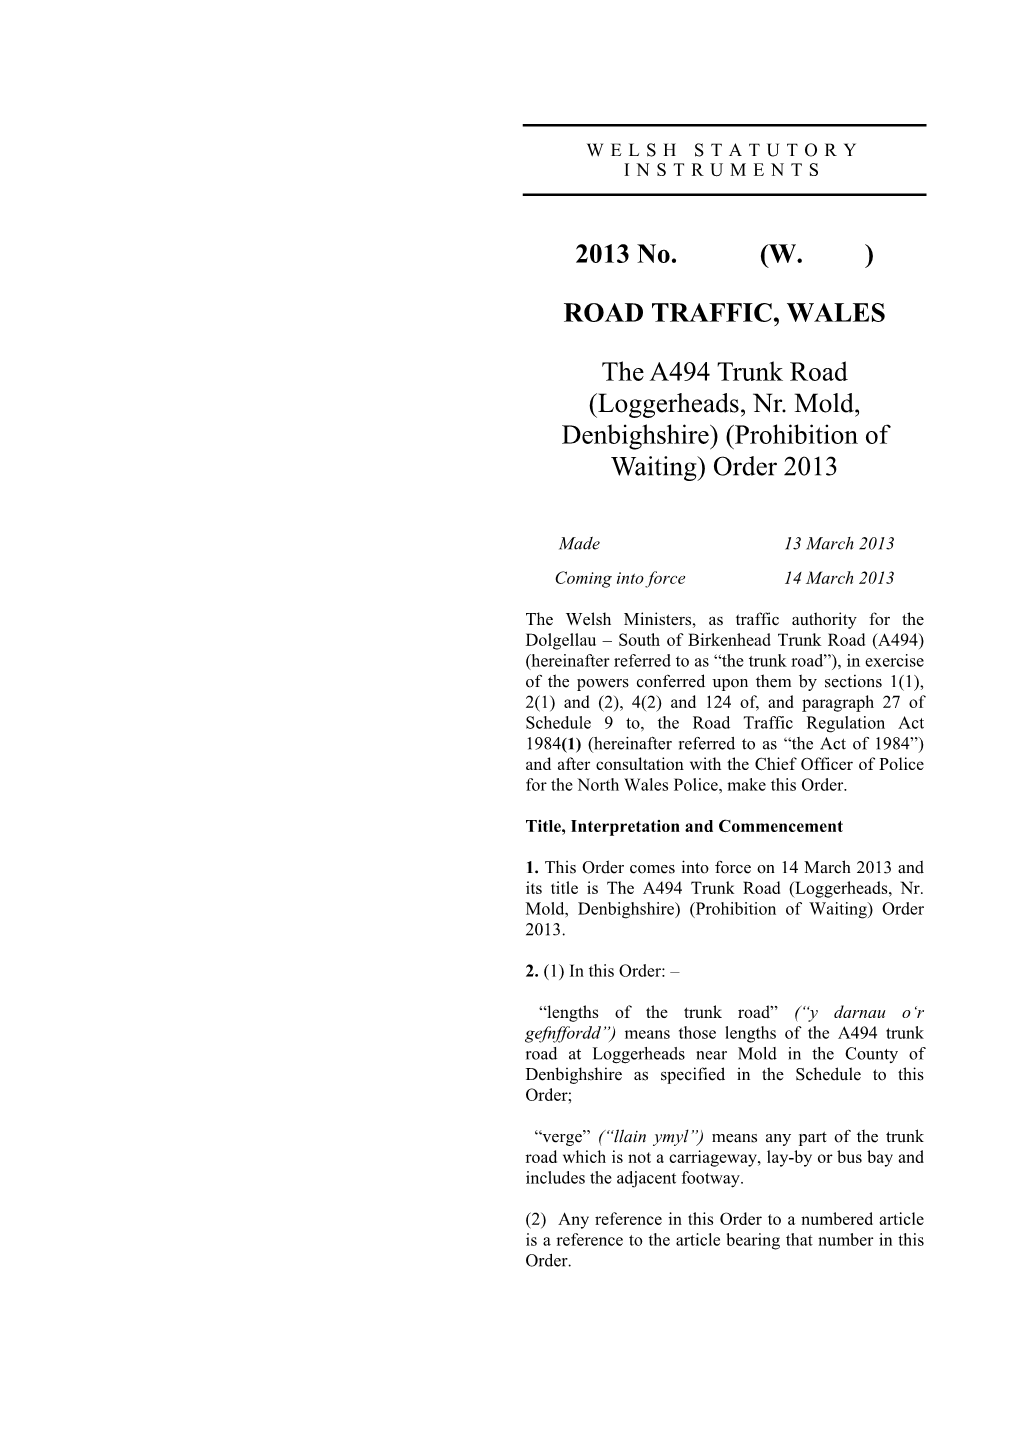 The A494 Trunk Road (Loggerheads, Nr. Mold, Denbighshire) (Prohibition of Waiting) Order 2013